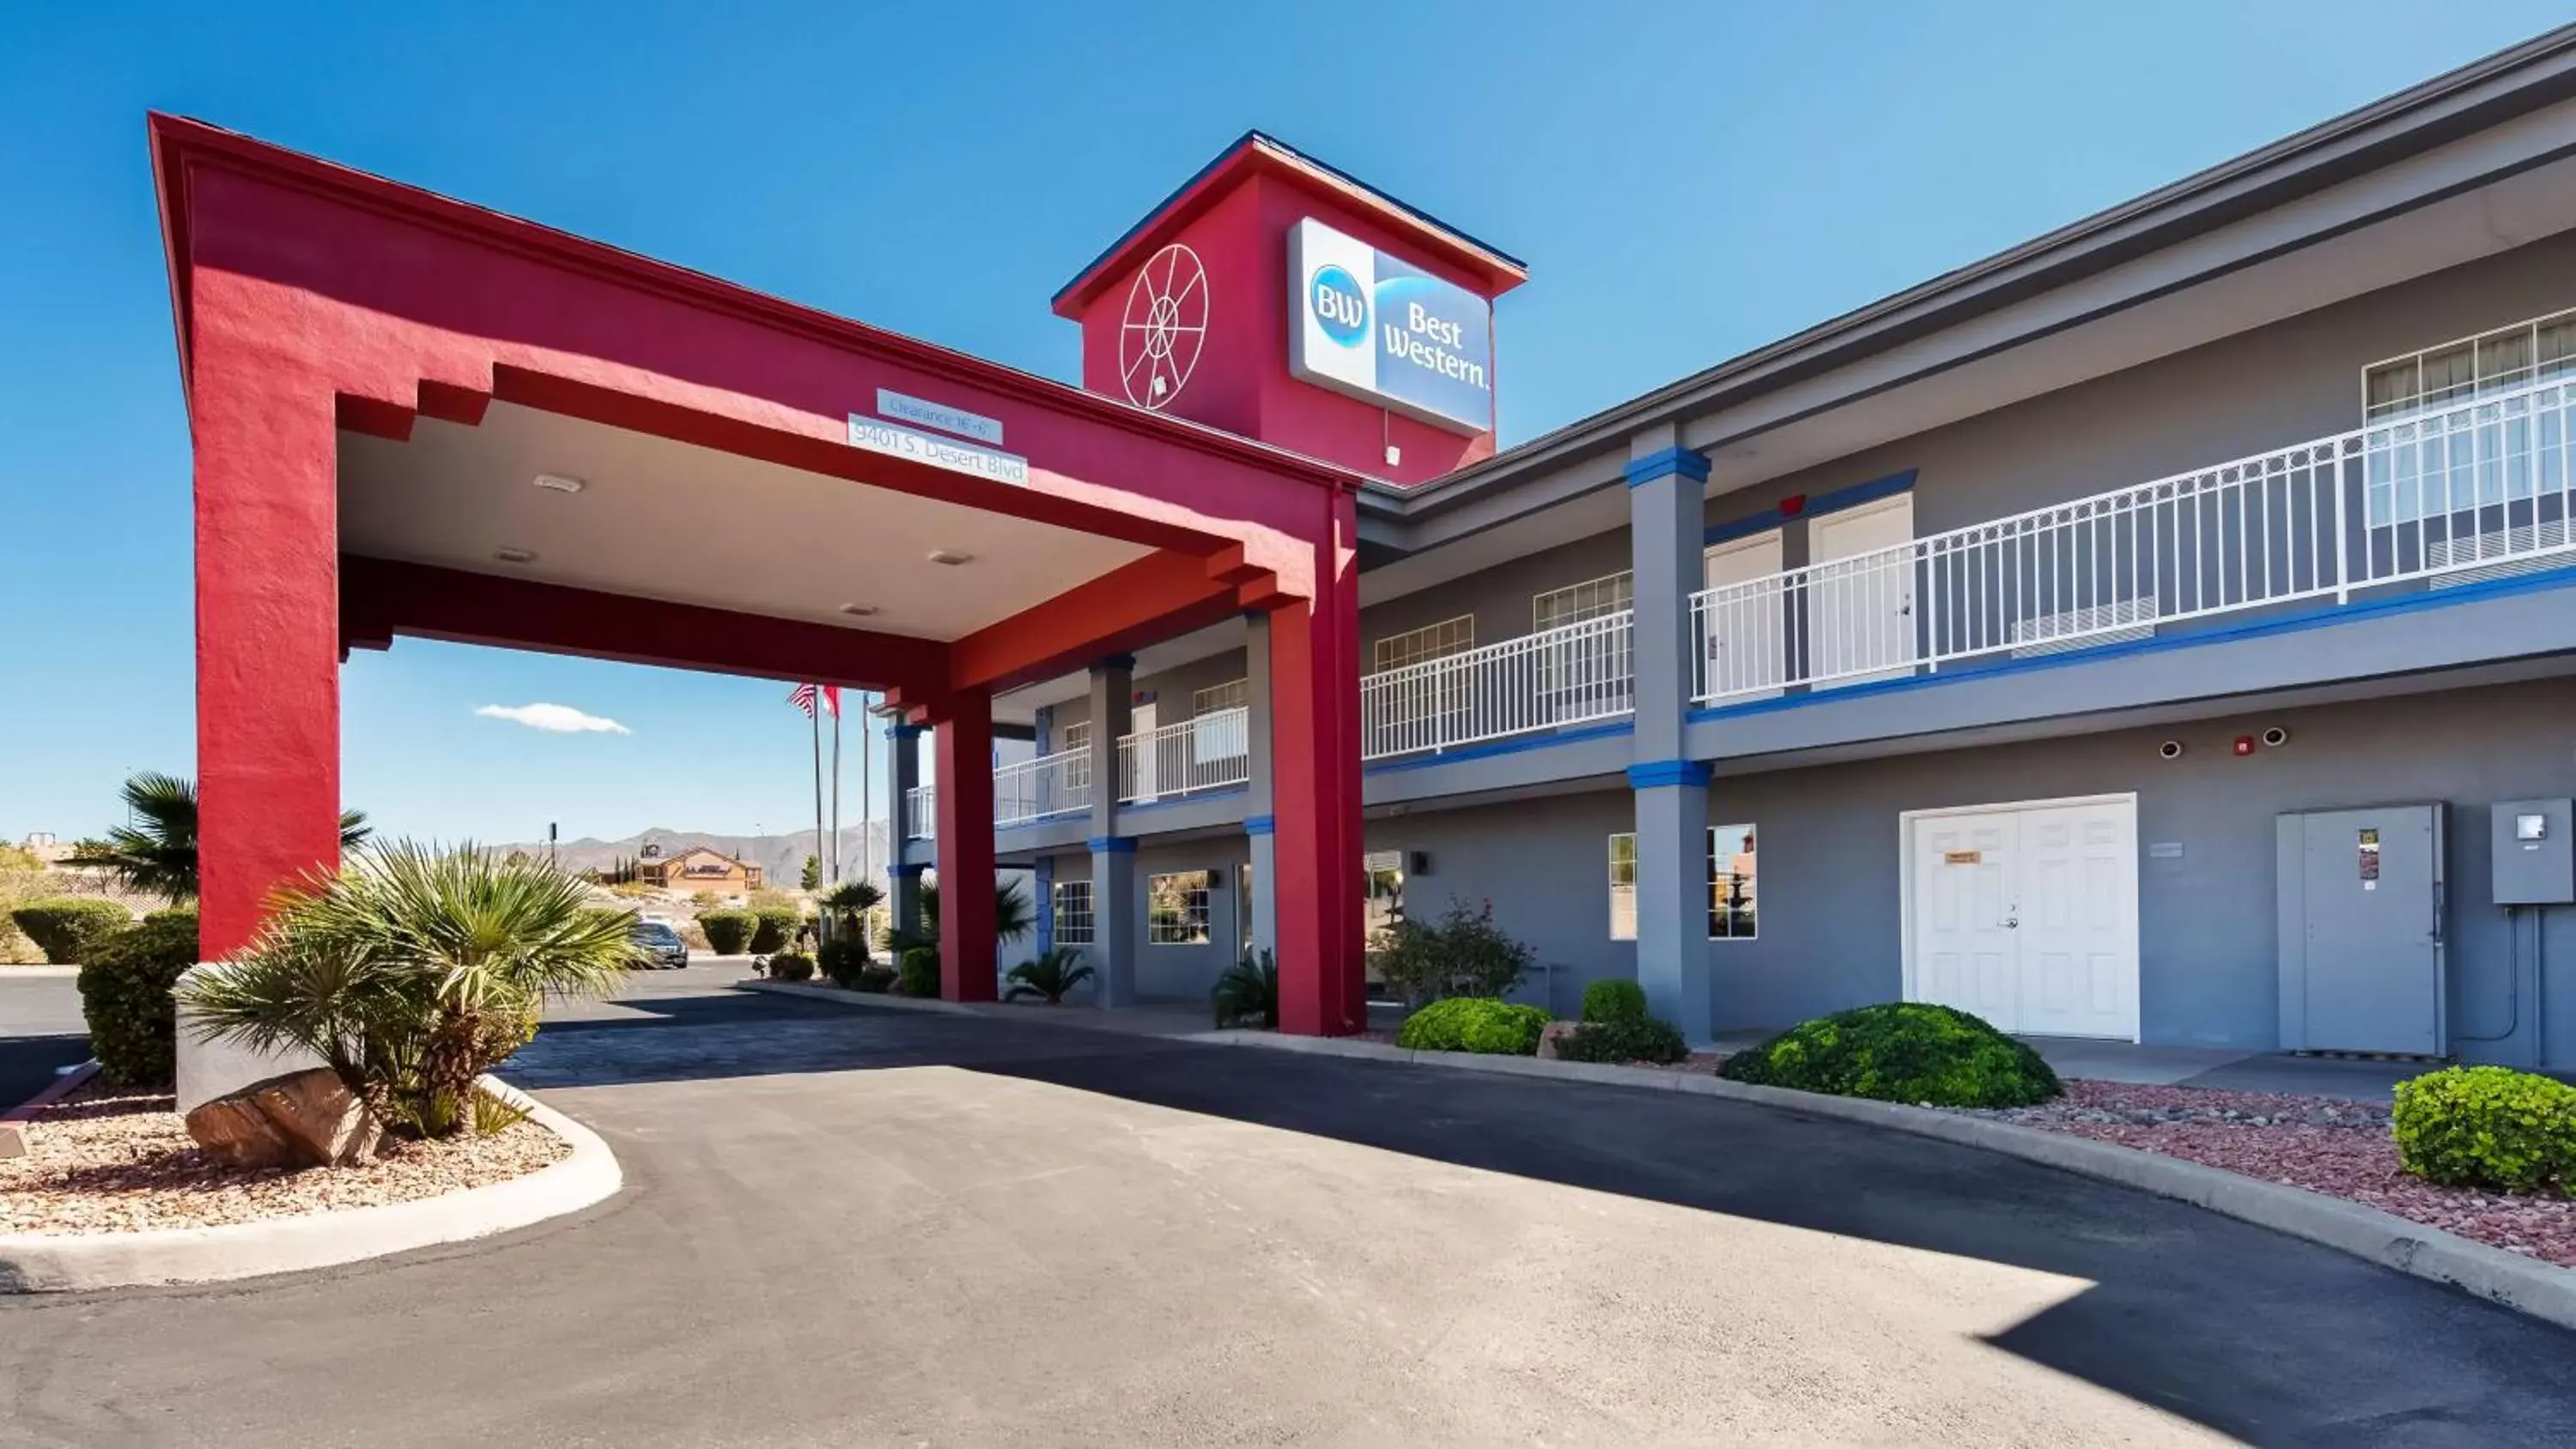 Property building in Best Western Anthony/West El Paso